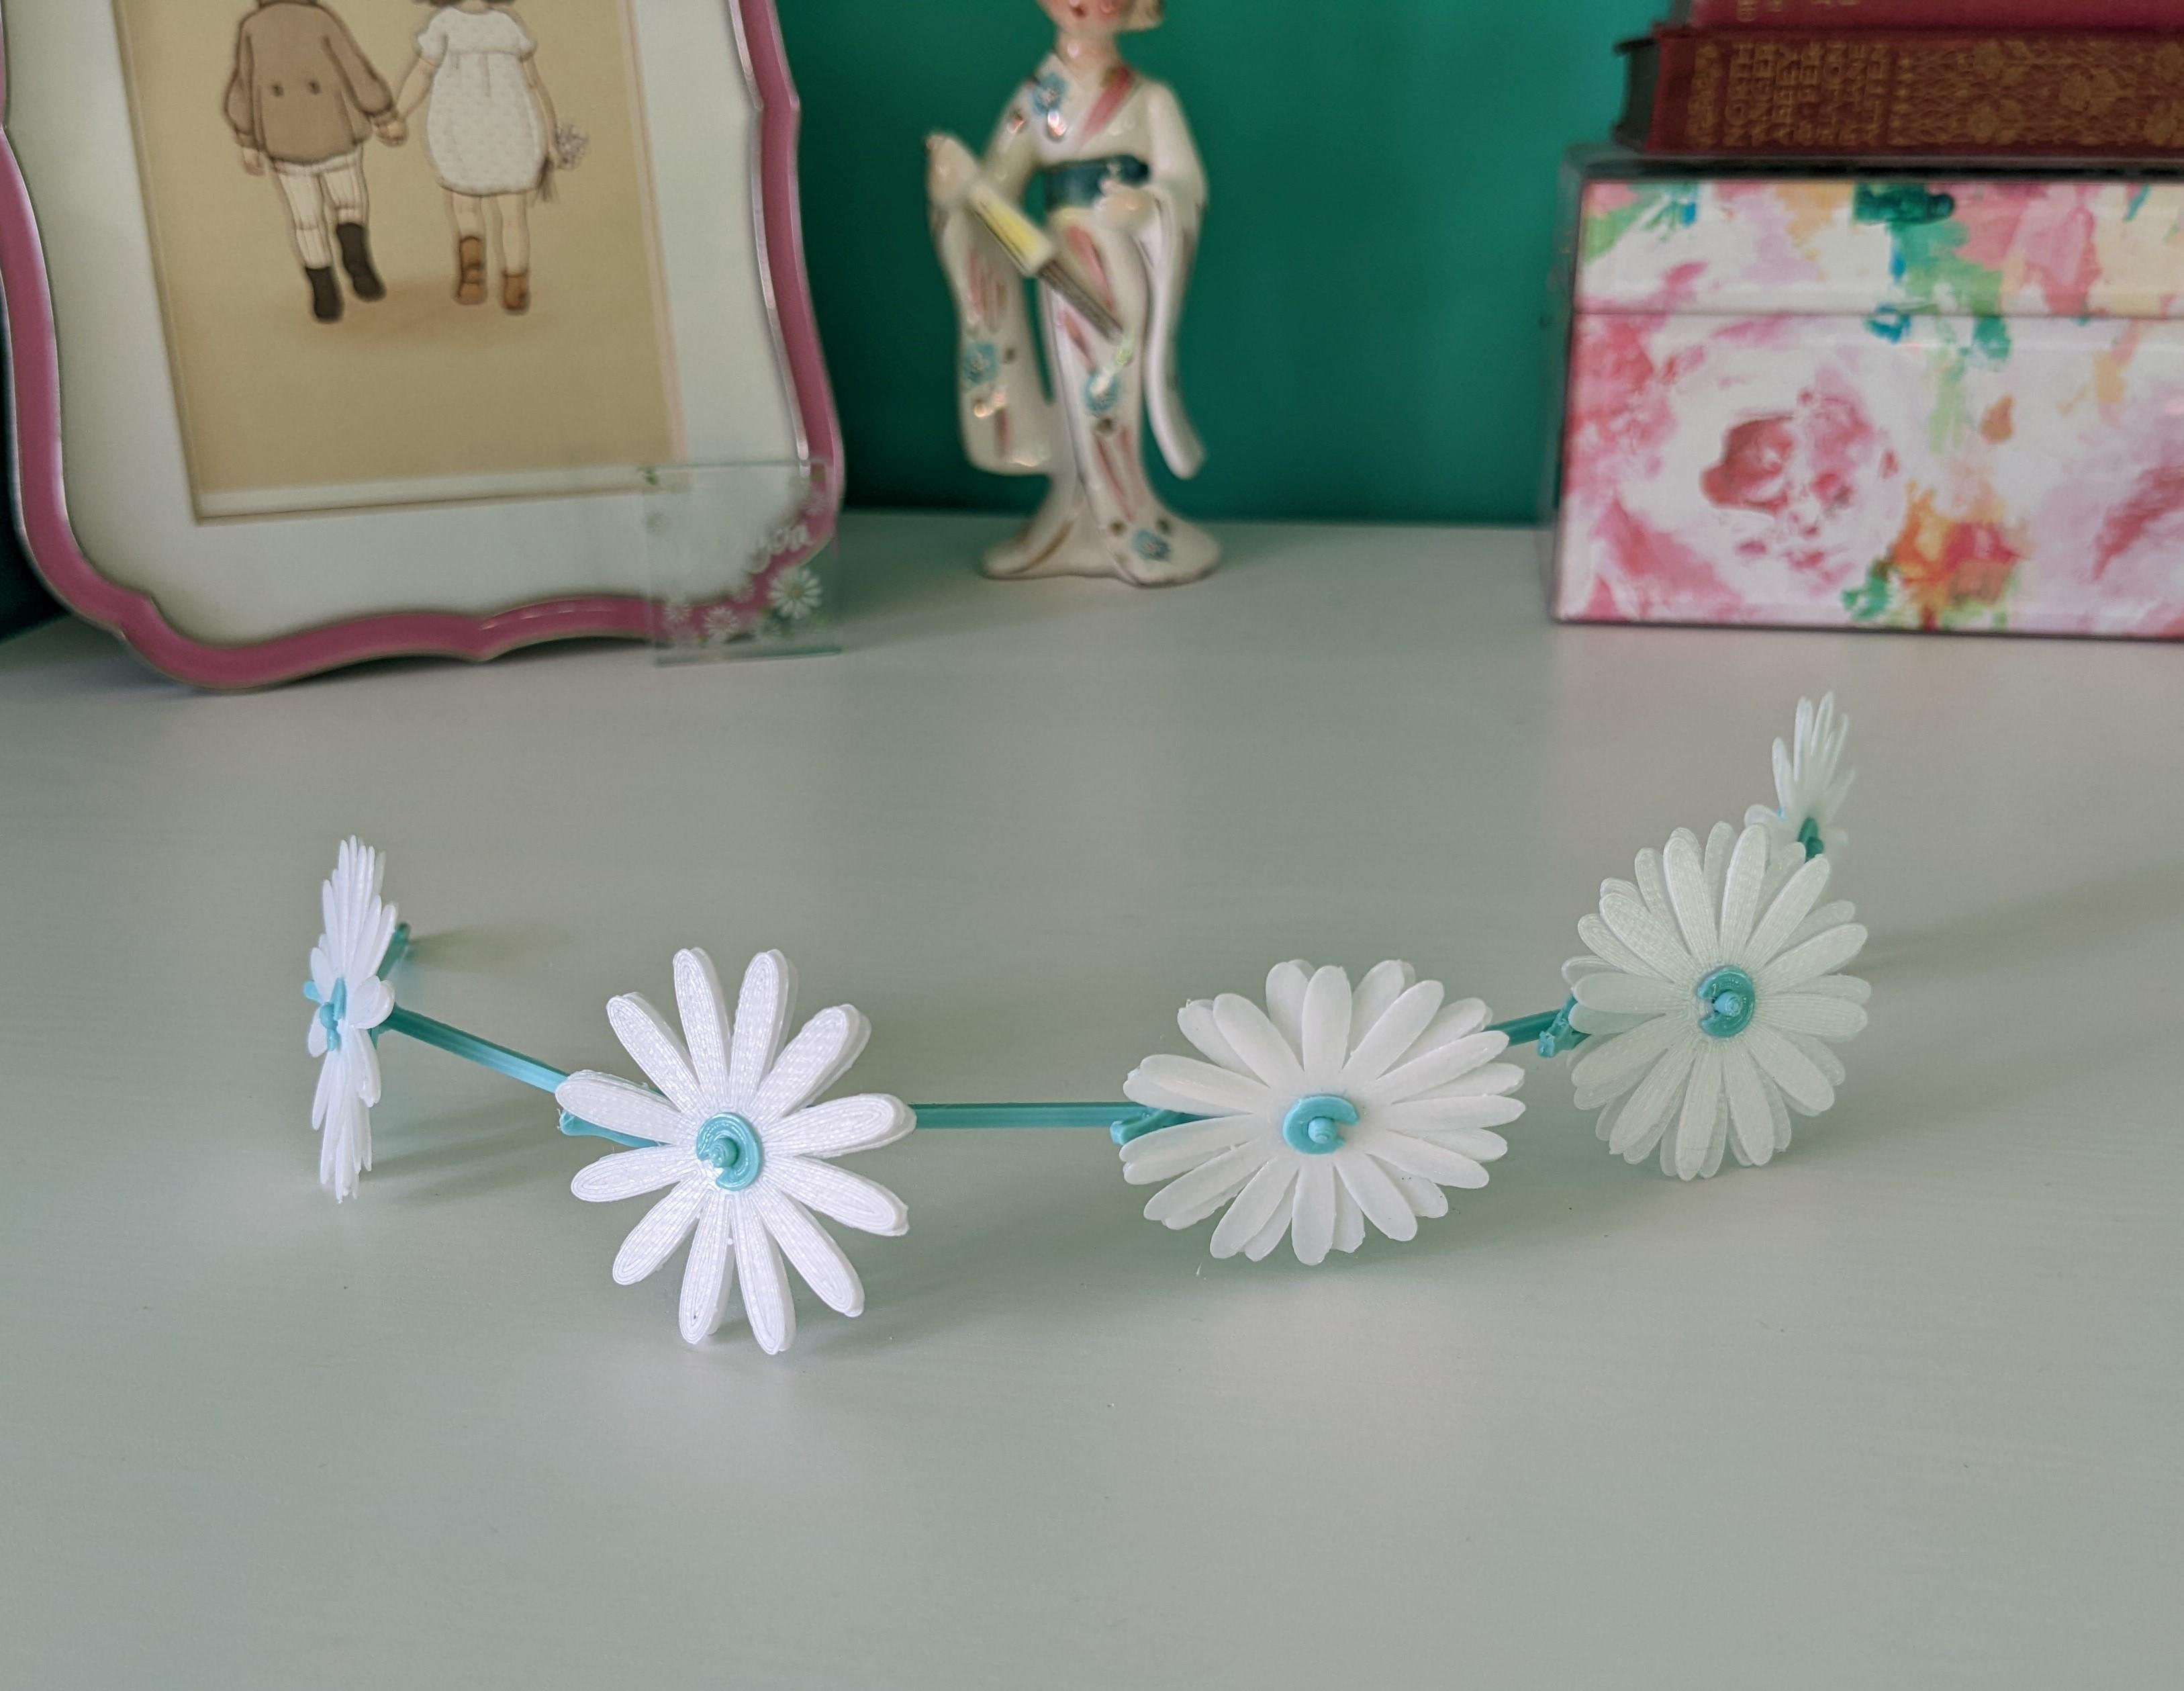 Daisy Chain DIY - See pictures... 3d model